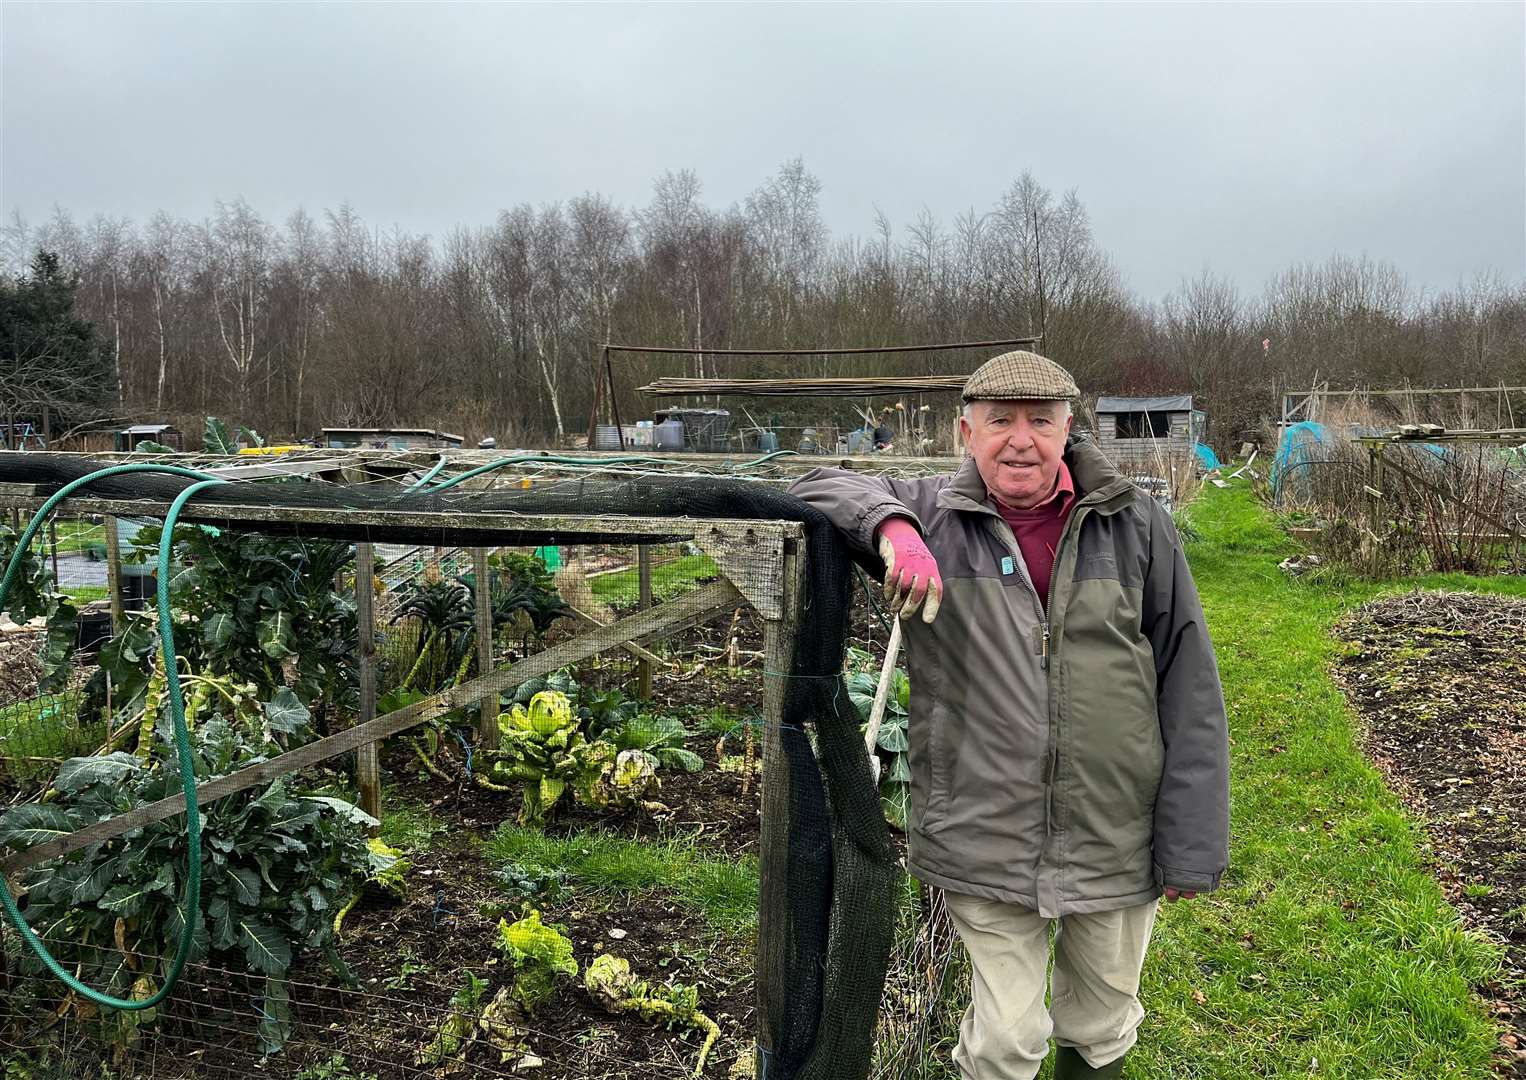 Chris Broad-Manges has owned his allotment for 20 years